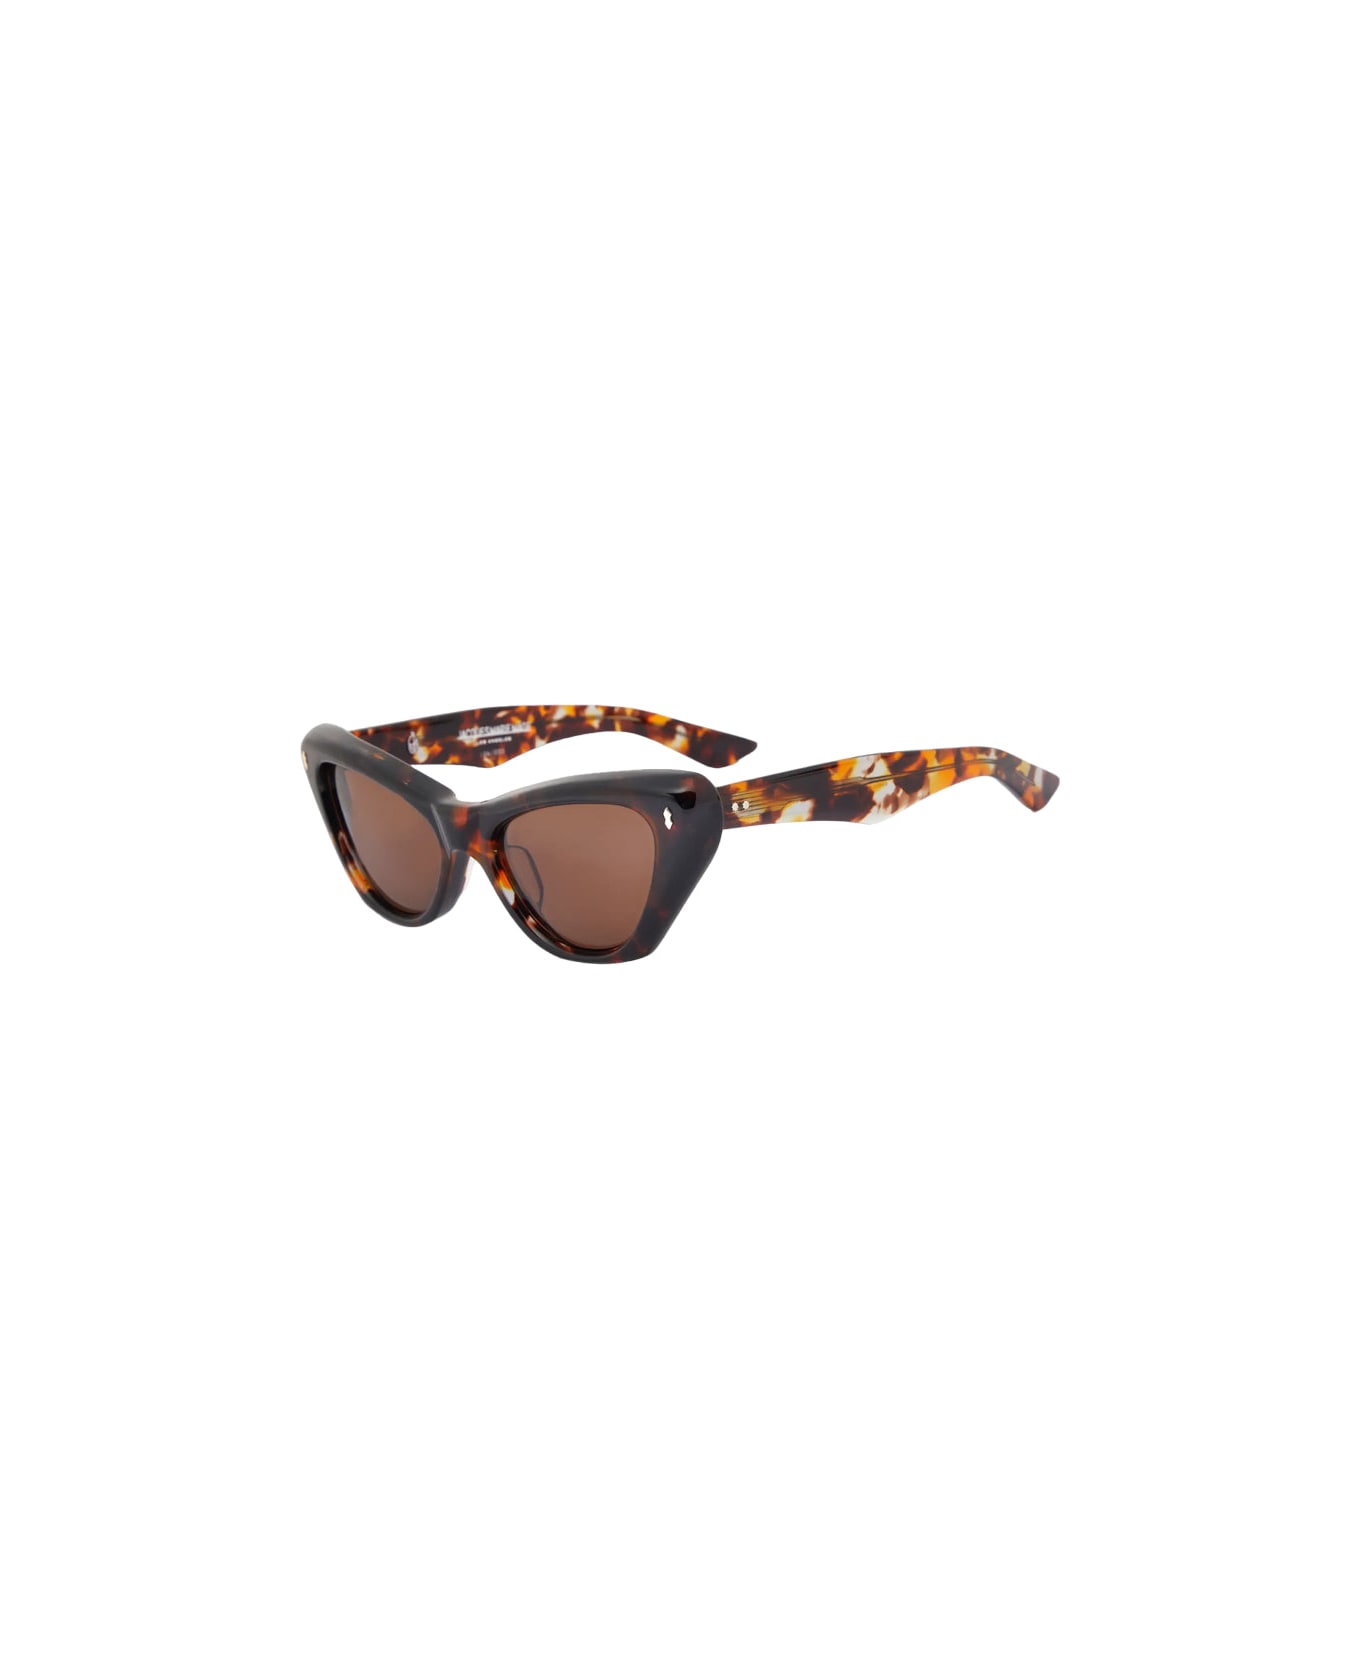 Jacques Marie Mage Kelly - Tortoise Sunglasses